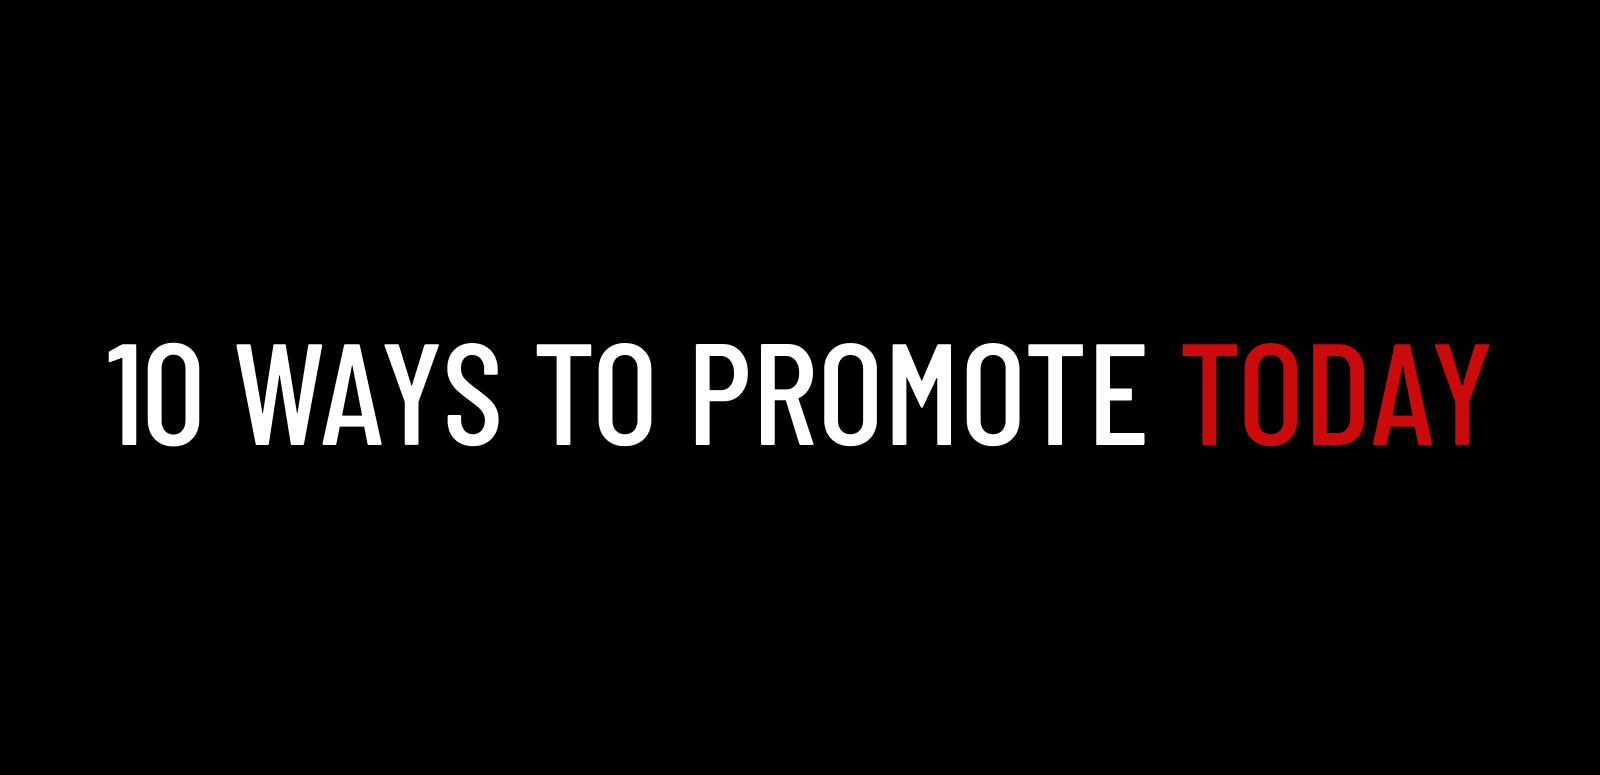 10 ways to promote today